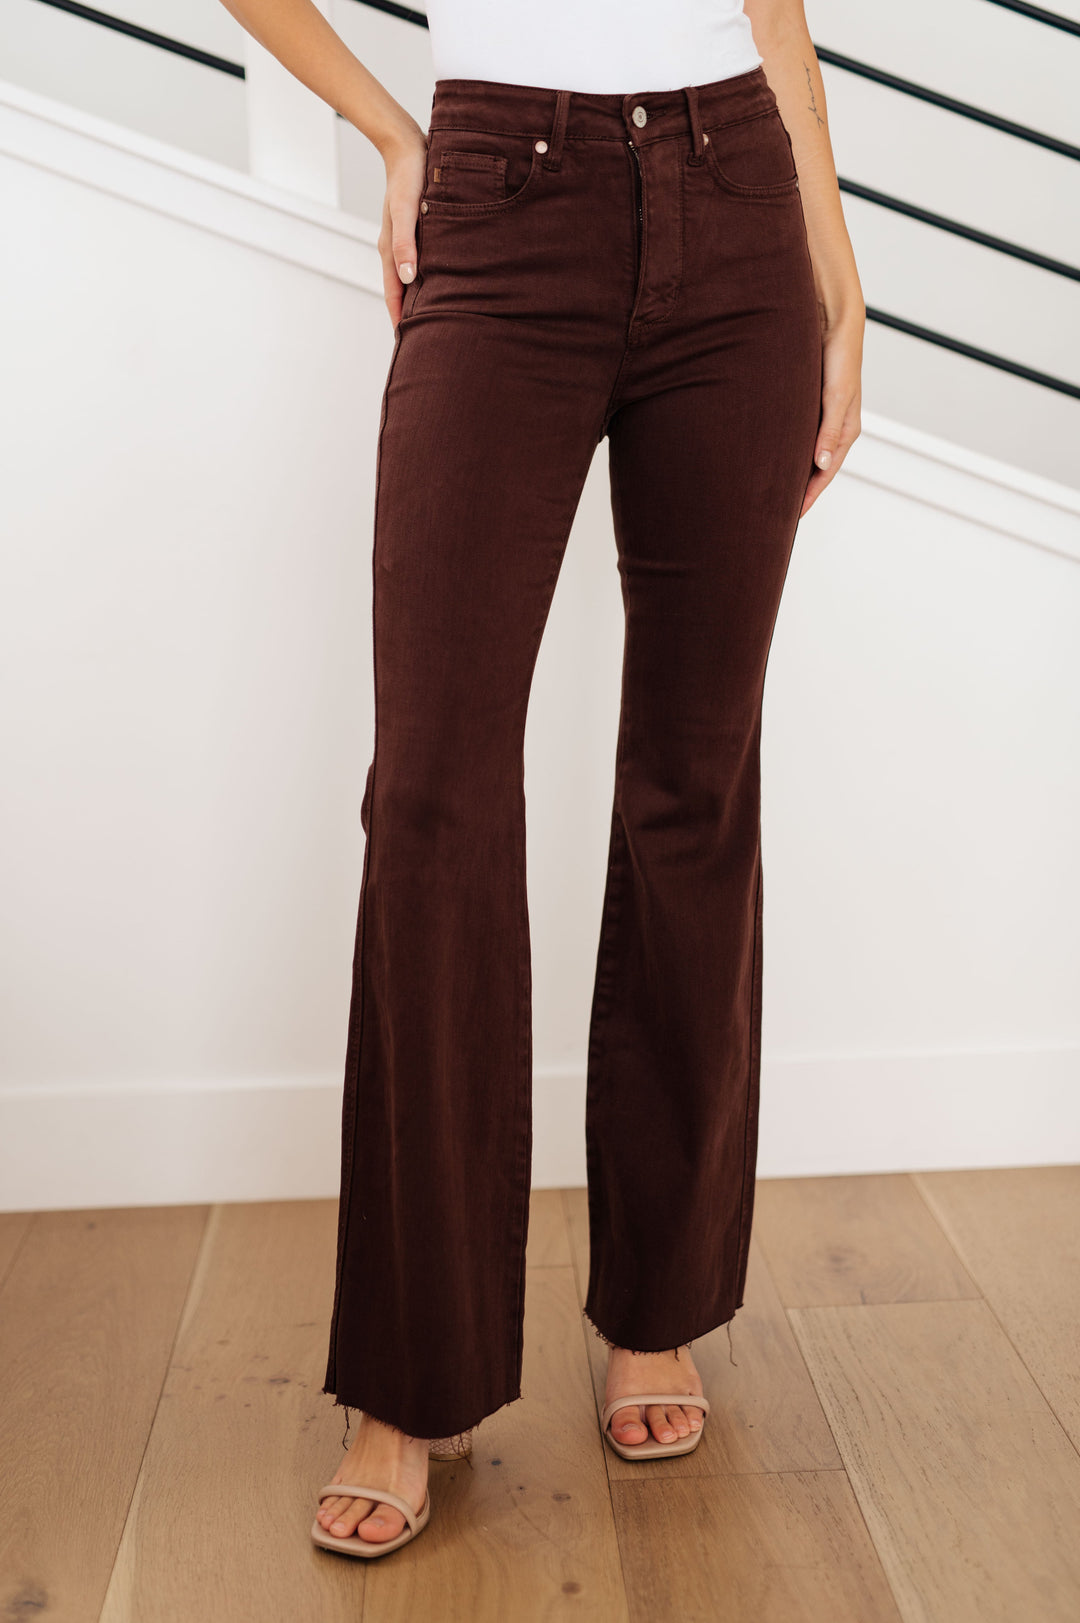 Sienna High Rise Control Top Flare Jeans in Espresso-Denim-Inspired by Justeen-Women's Clothing Boutique in Chicago, Illinois